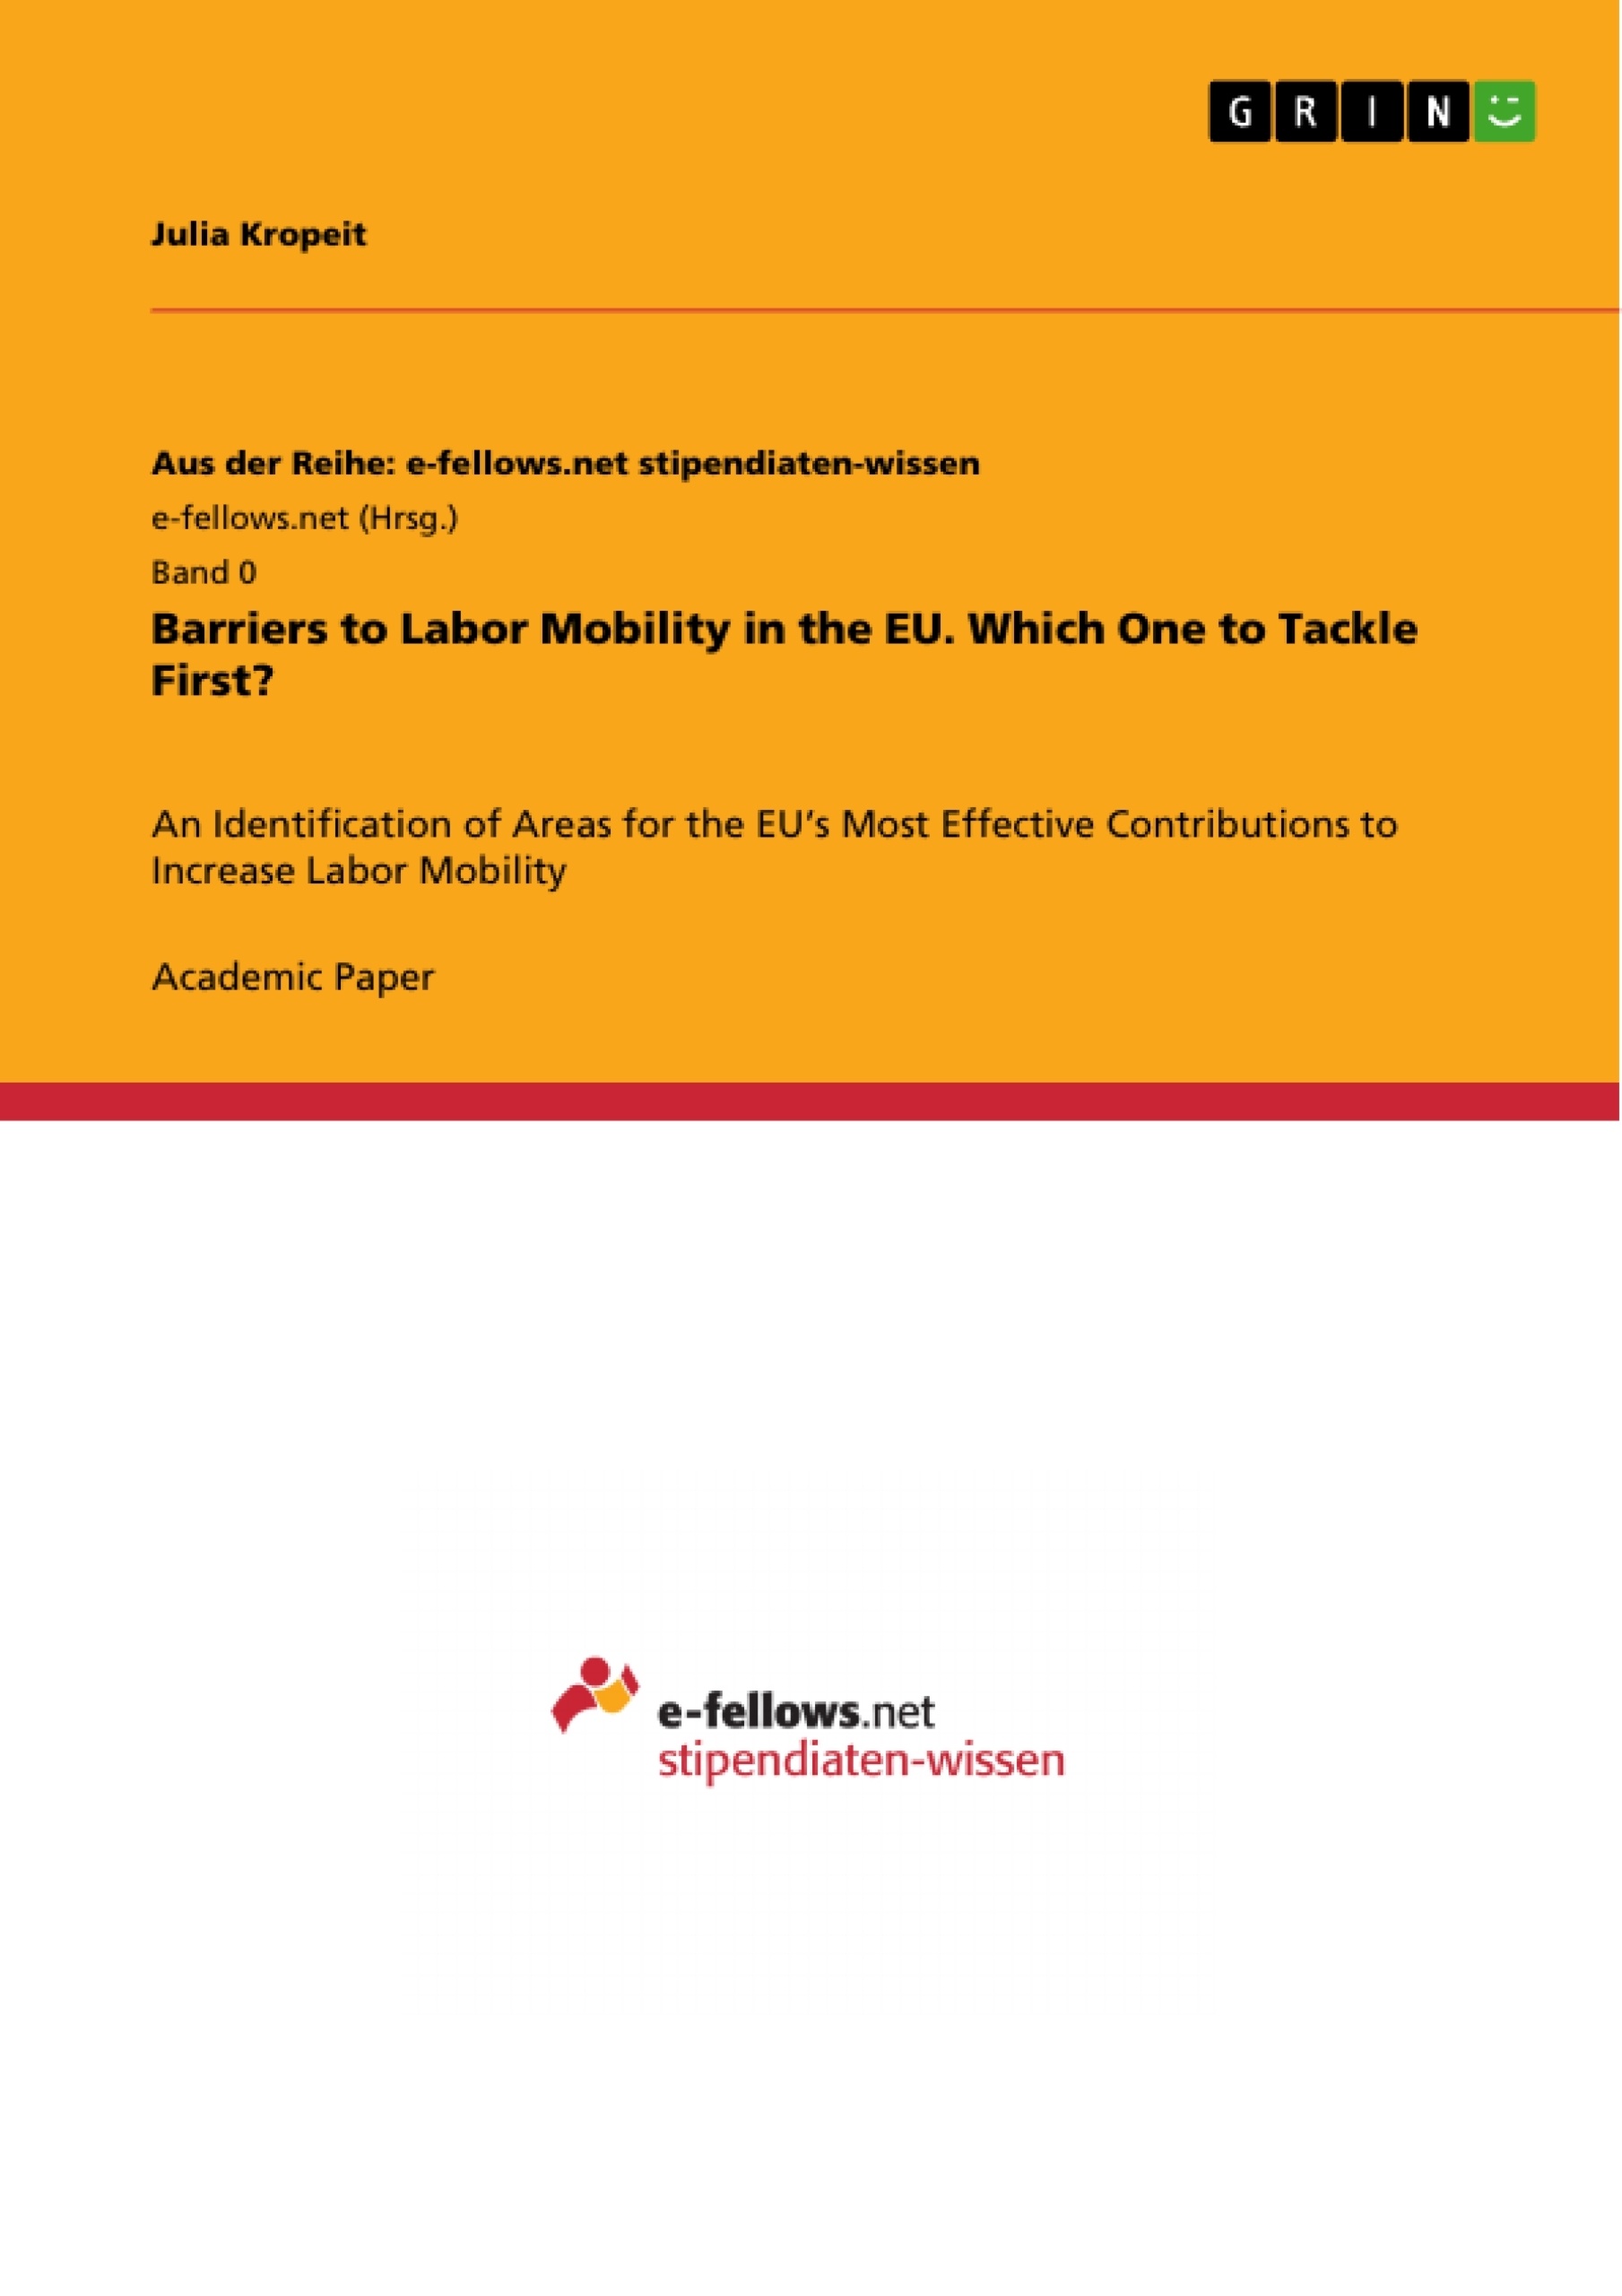 Title: Barriers to Labor Mobility in the EU. Which One to Tackle First?